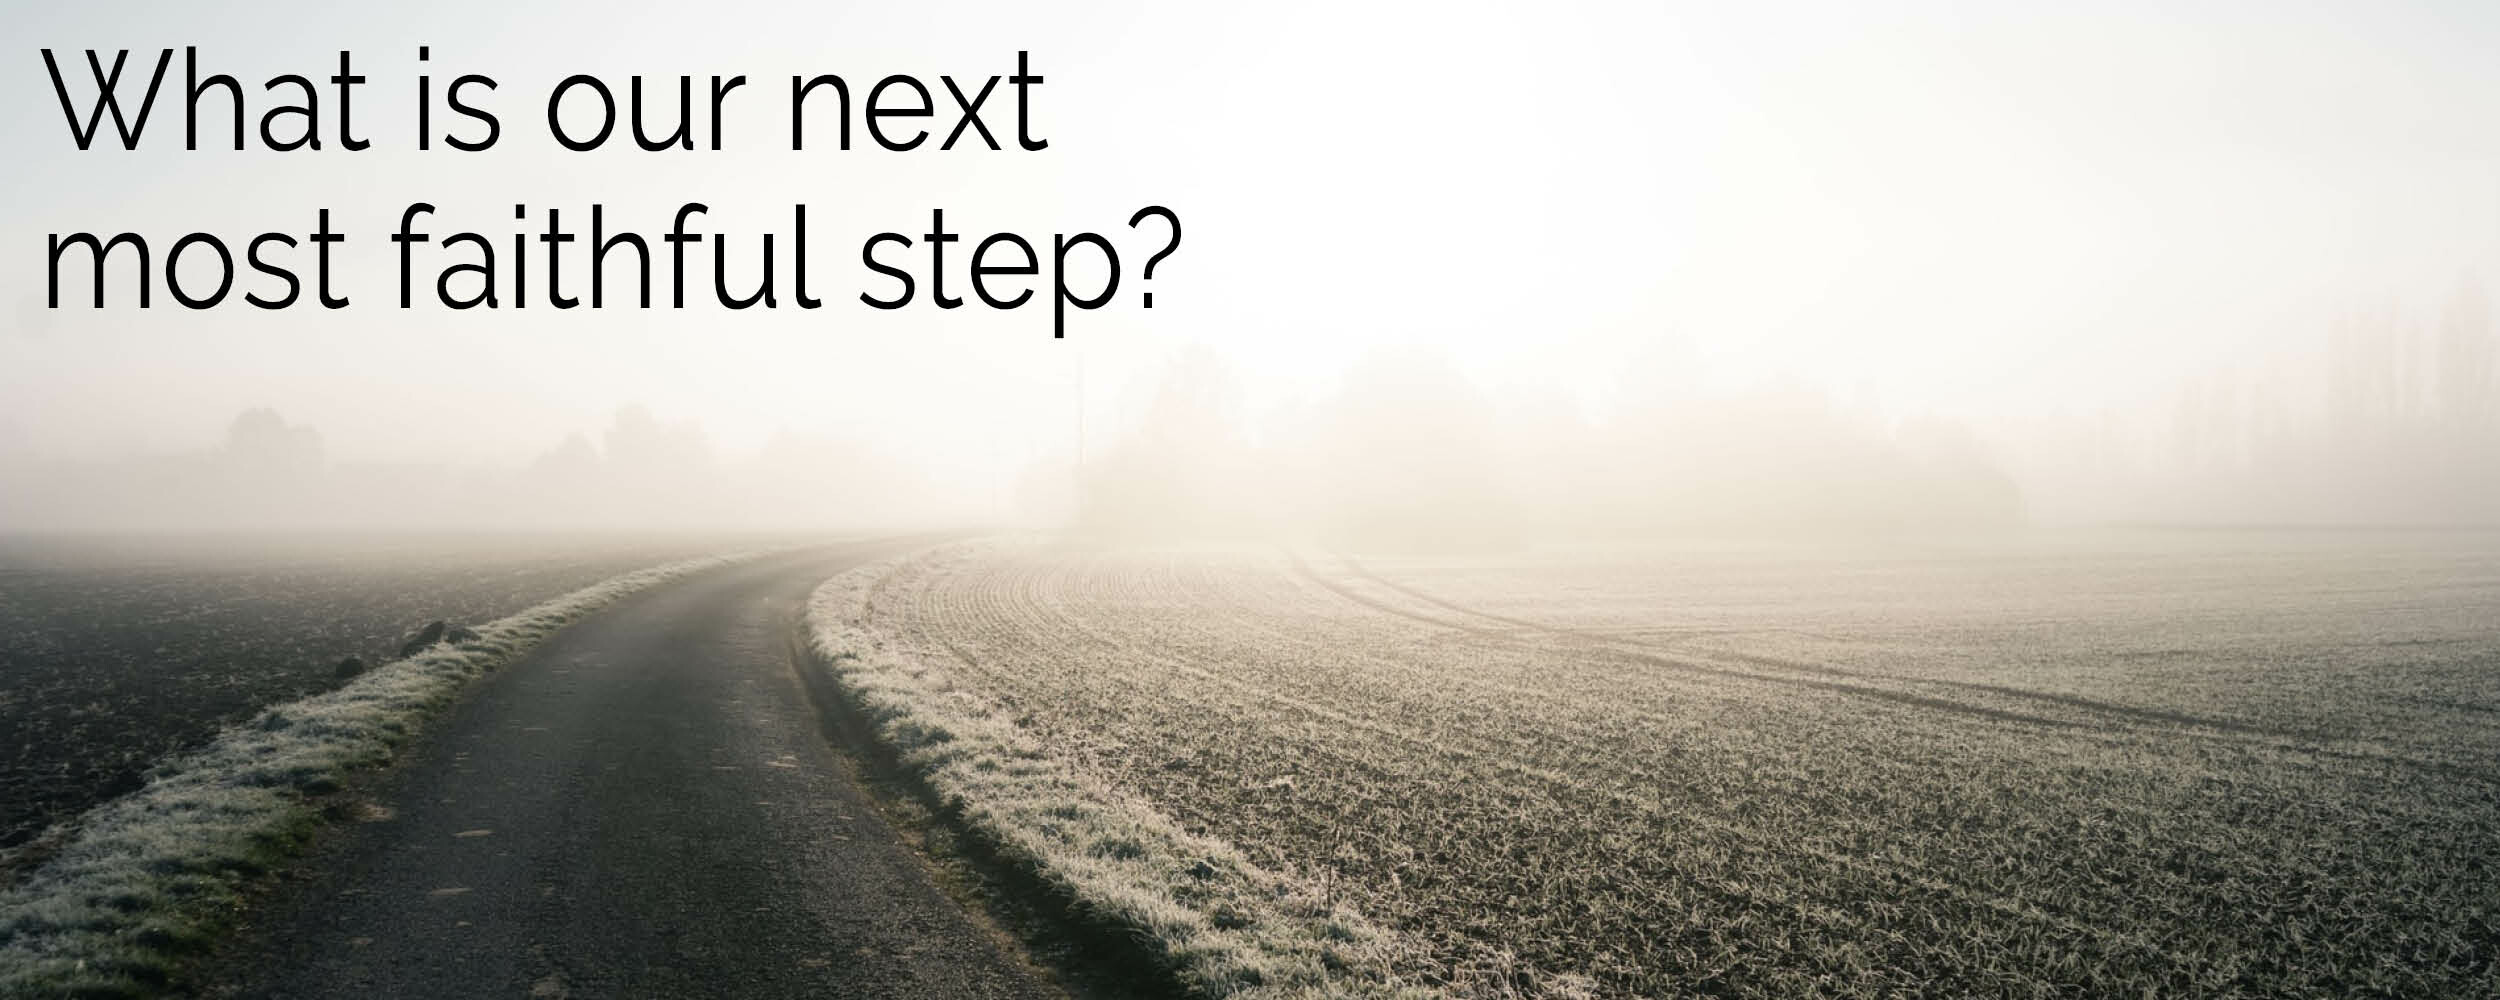 What is our next most faithful step